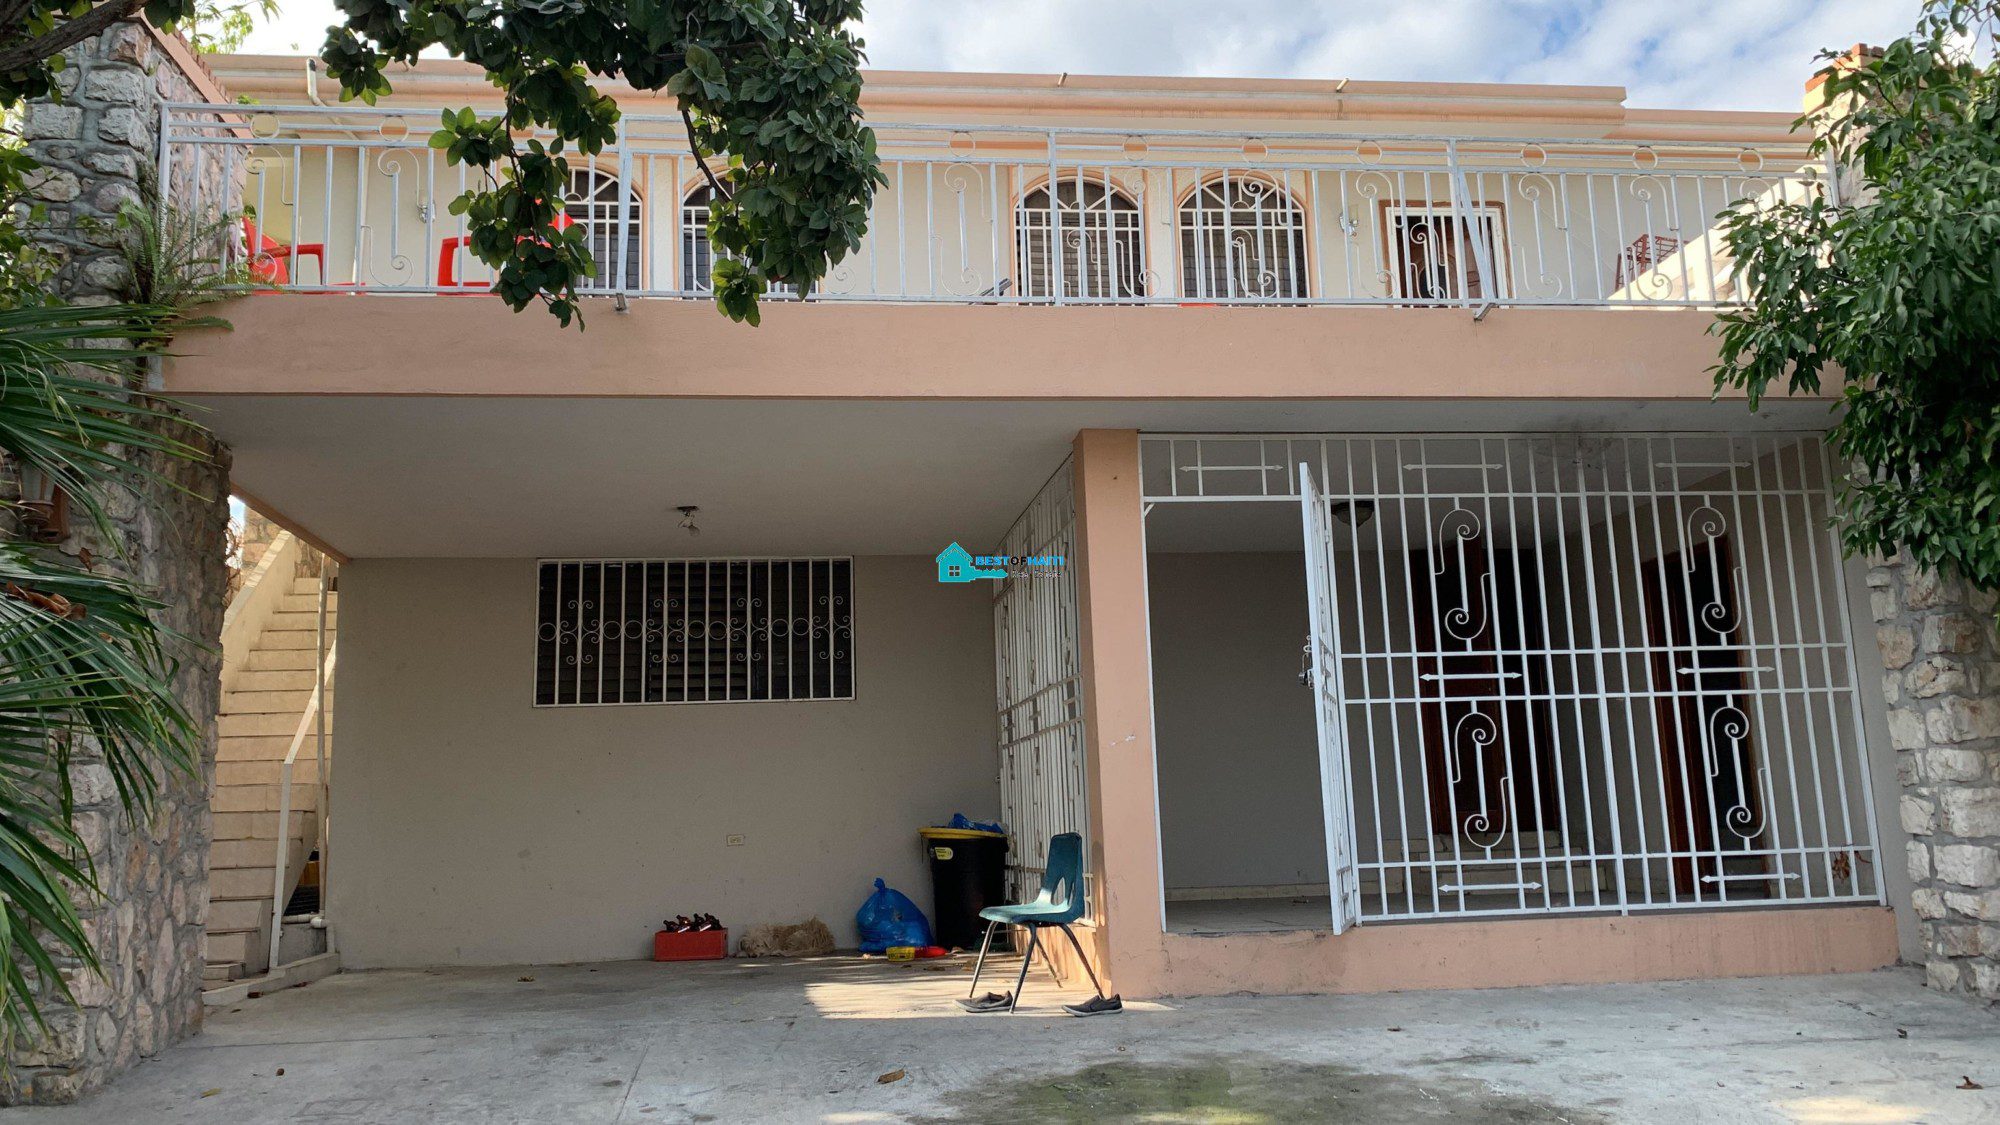 3 Bedrooms, 2 Baths Unfurnished Apartment for Rent in Delmas 83, Haiti